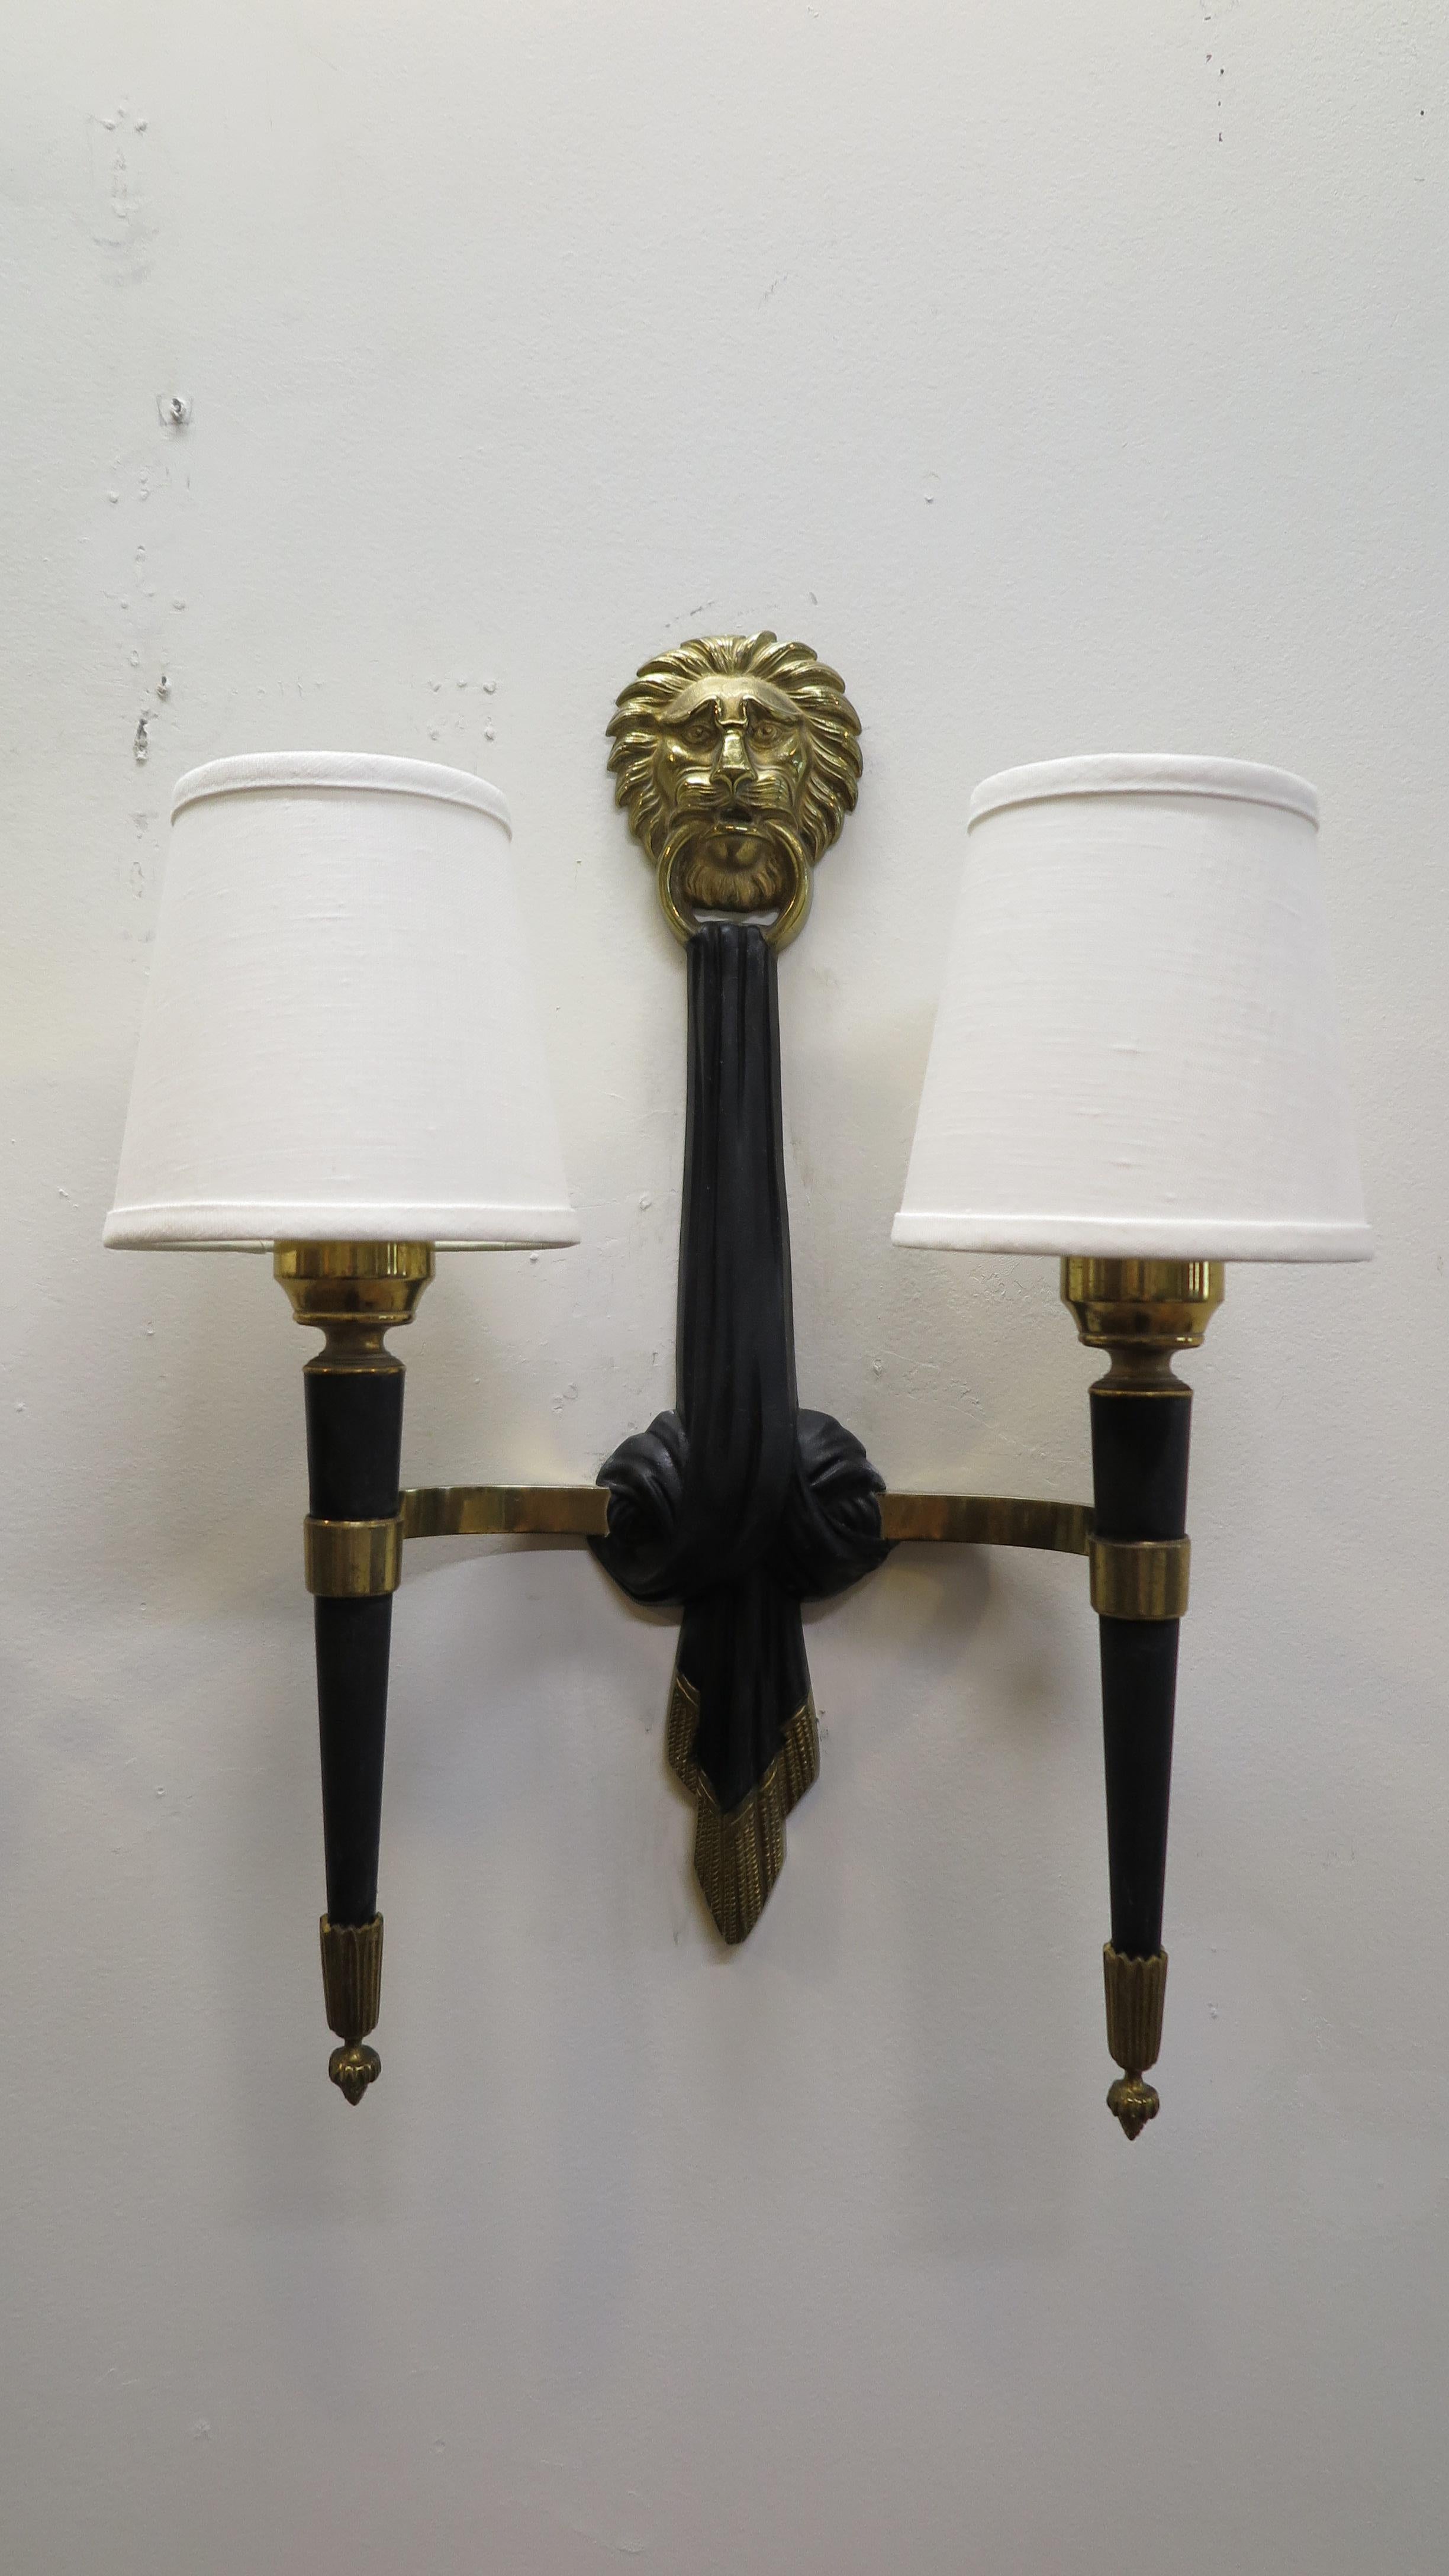 Pair of French midcentury sconces attributed to Maison Jansen. Elegant brass and bronze lion topped sconces with two lights each with Linen shades. Very good condition rewired for US.